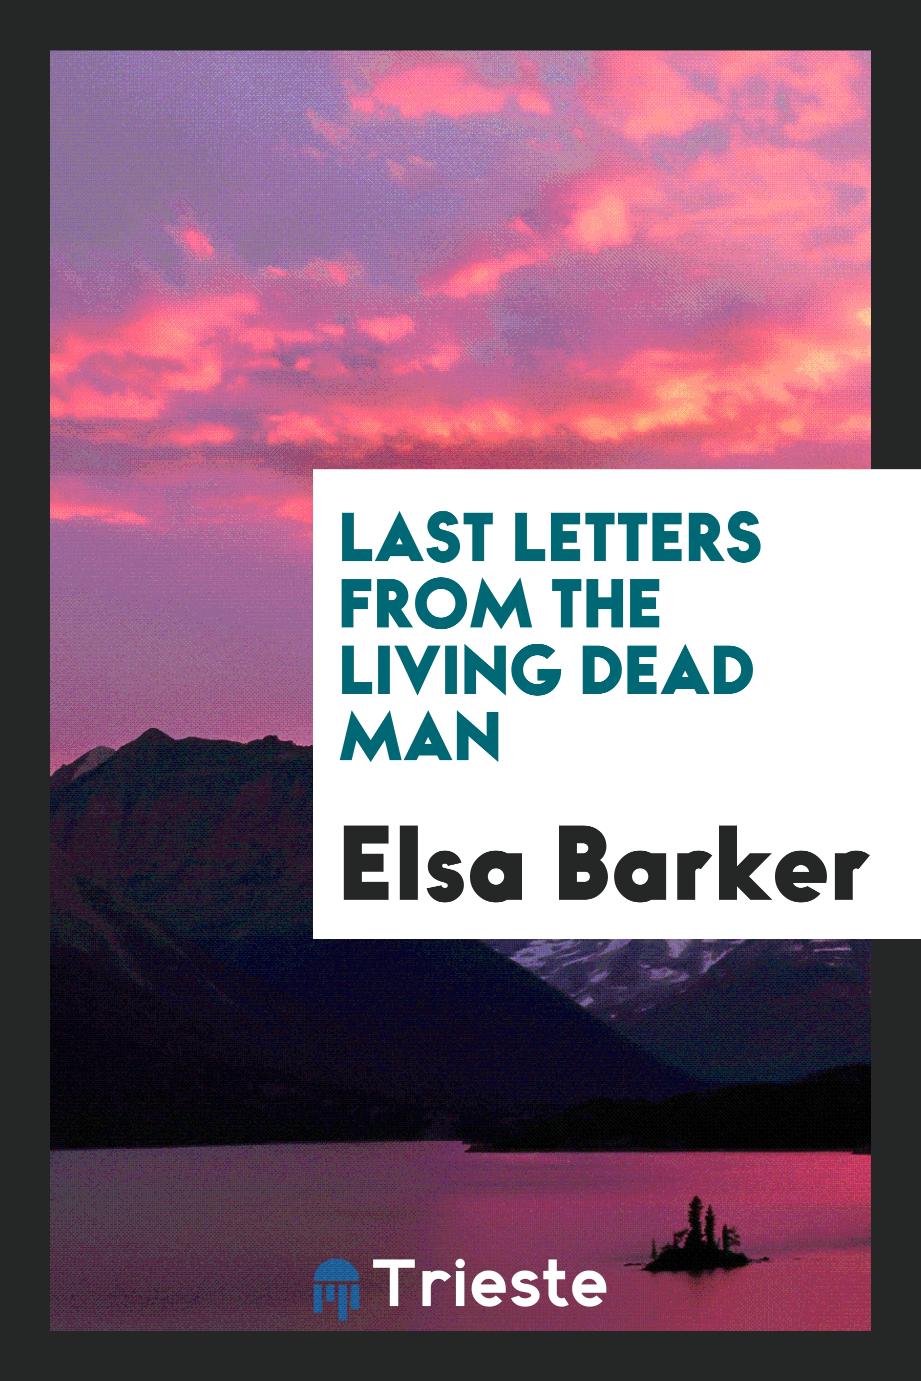 Last letters from the living dead man